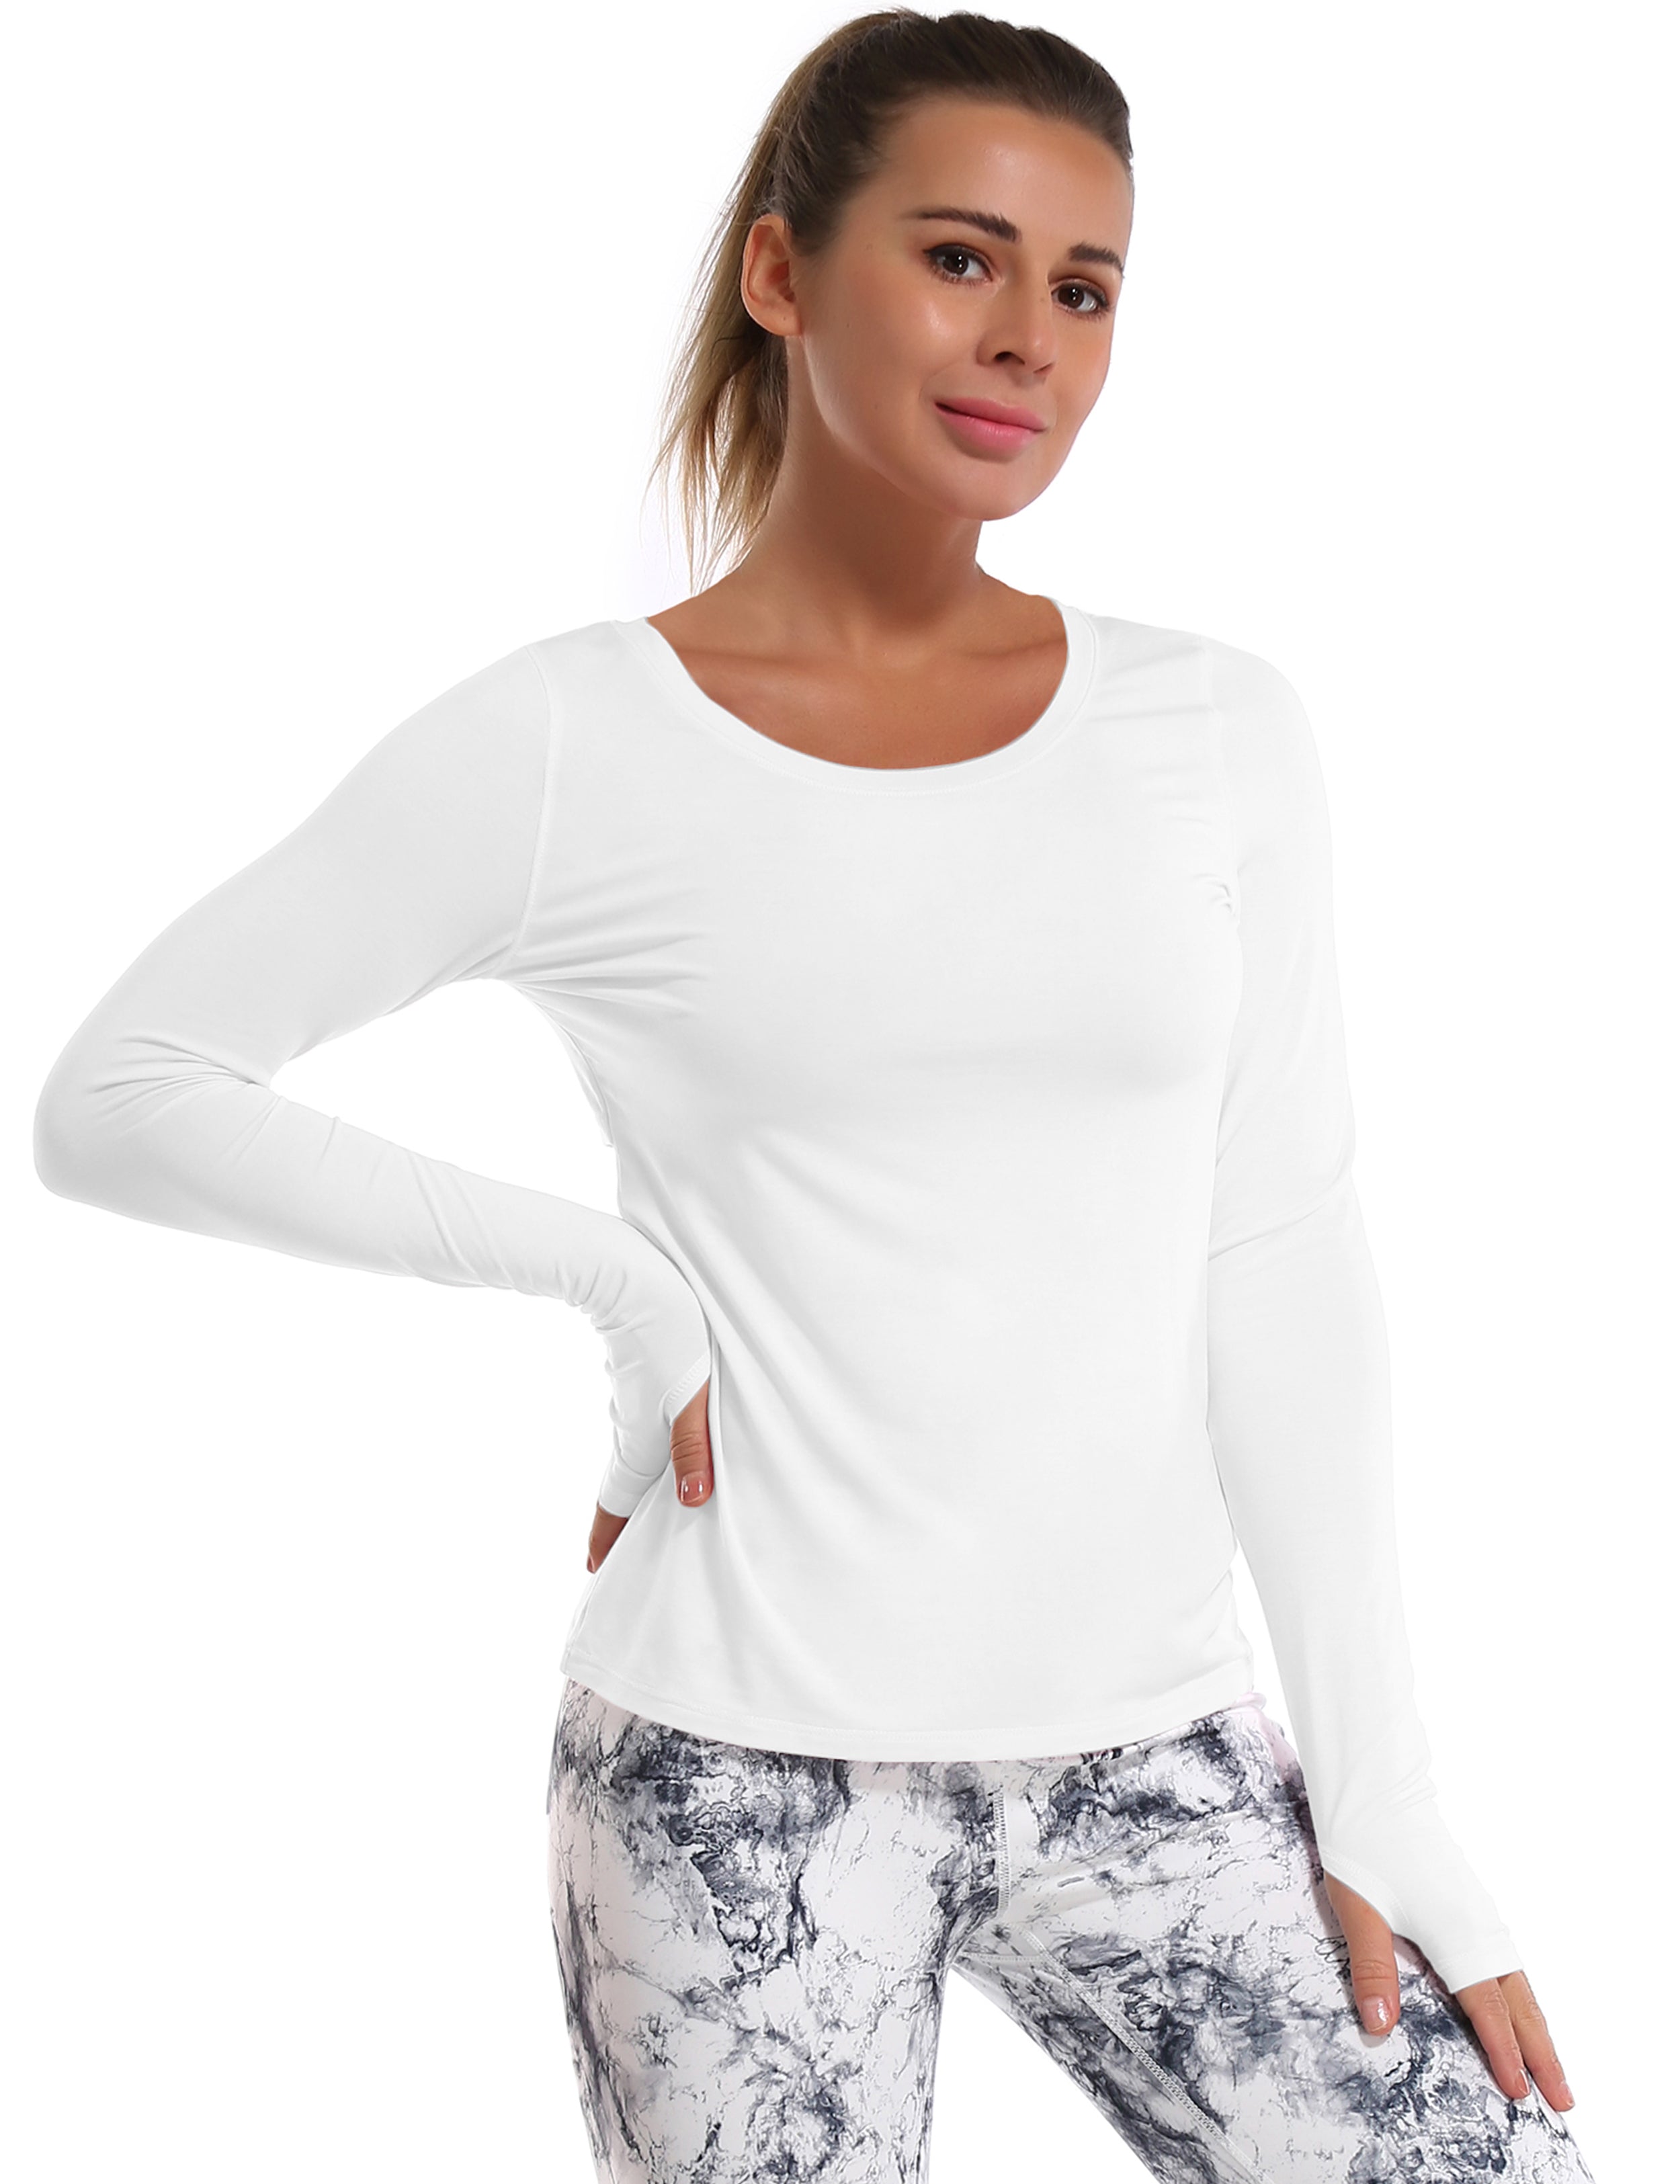 Open Back Long Sleeve Tops white Designed for On the Move Slim fit 93%Modal/7%Spandex Four-way stretch Naturally breathable Super-Soft, Modal Fabric